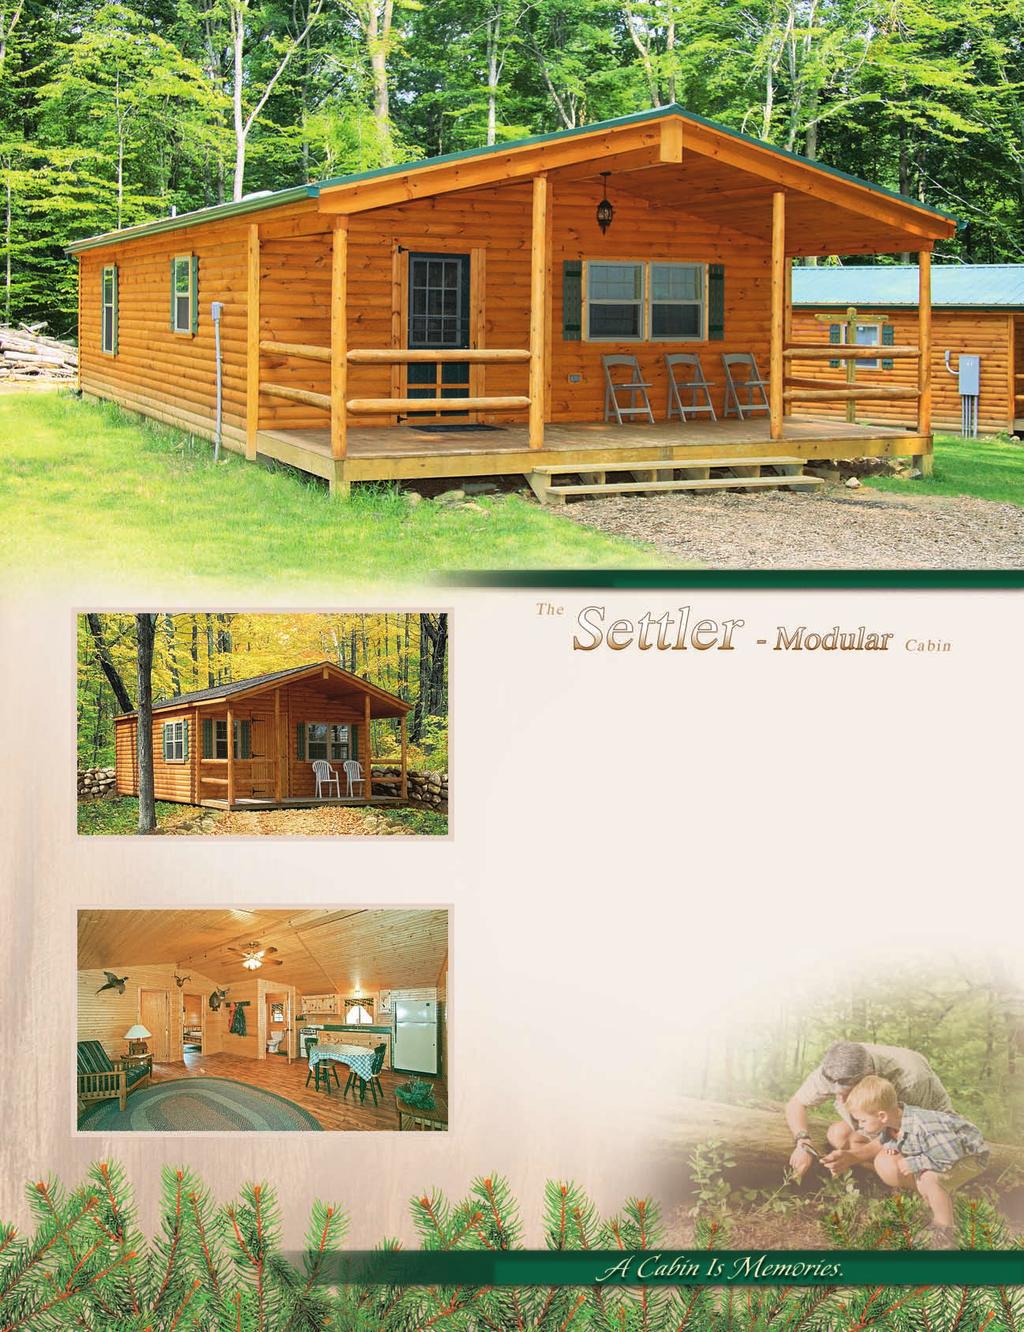 22' x 42' (measurements include 6' porch) 16' x 28' (measurements include 6' porch) Modular Settlers With widths of 16', 20', 22', 24' or 26' our modular Settlers can be configured to fit your needs